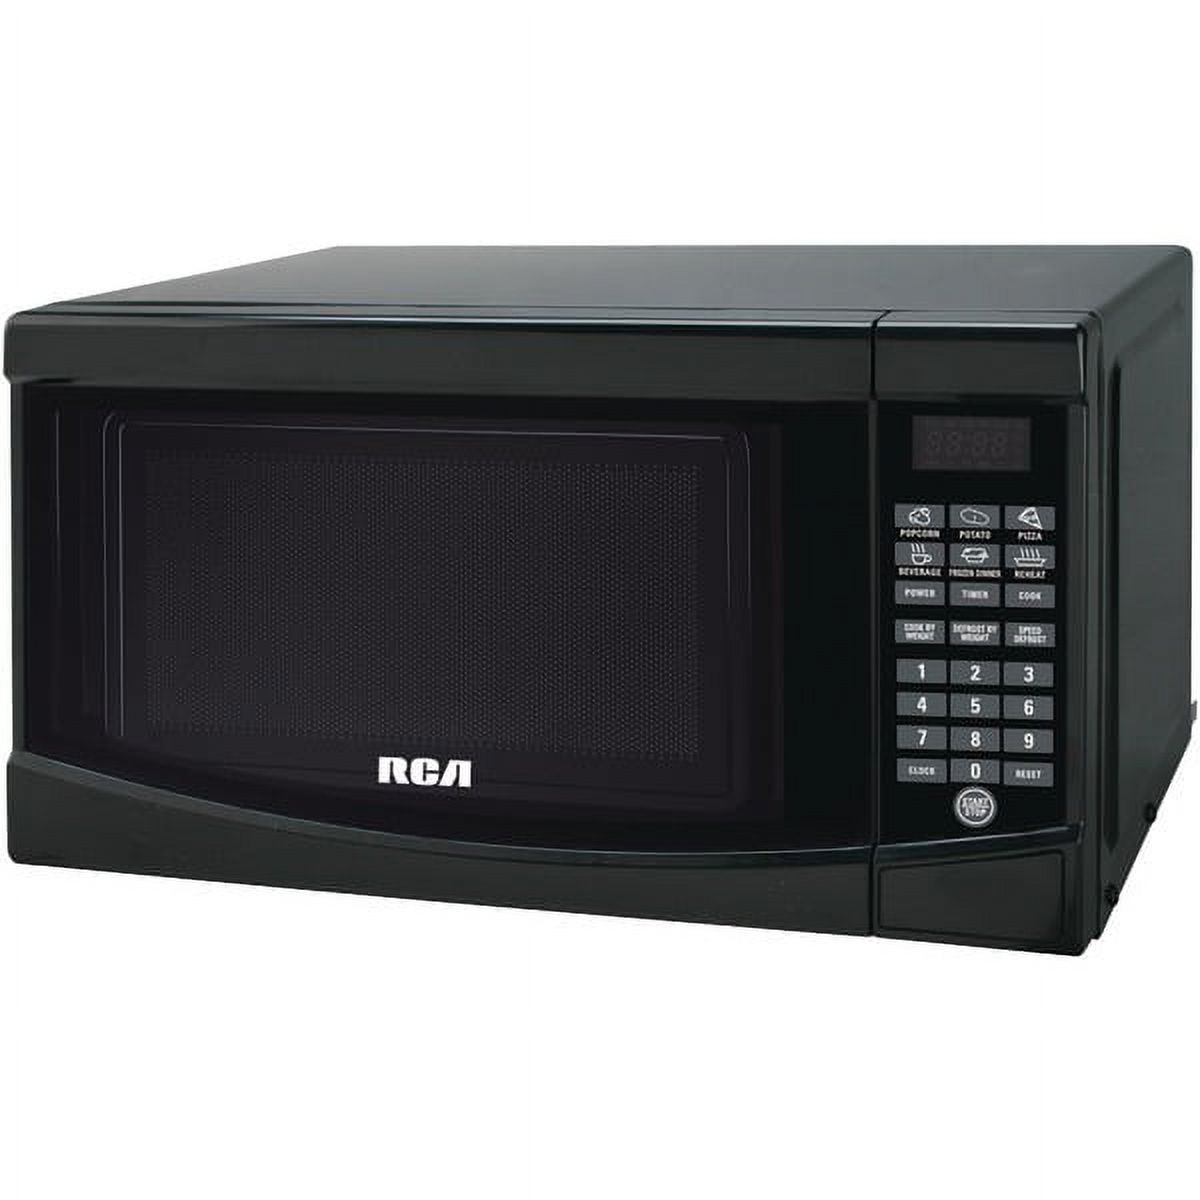 RCA 0.7 Cu. ft. New Countertop Microwave Oven - Black - image 1 of 3